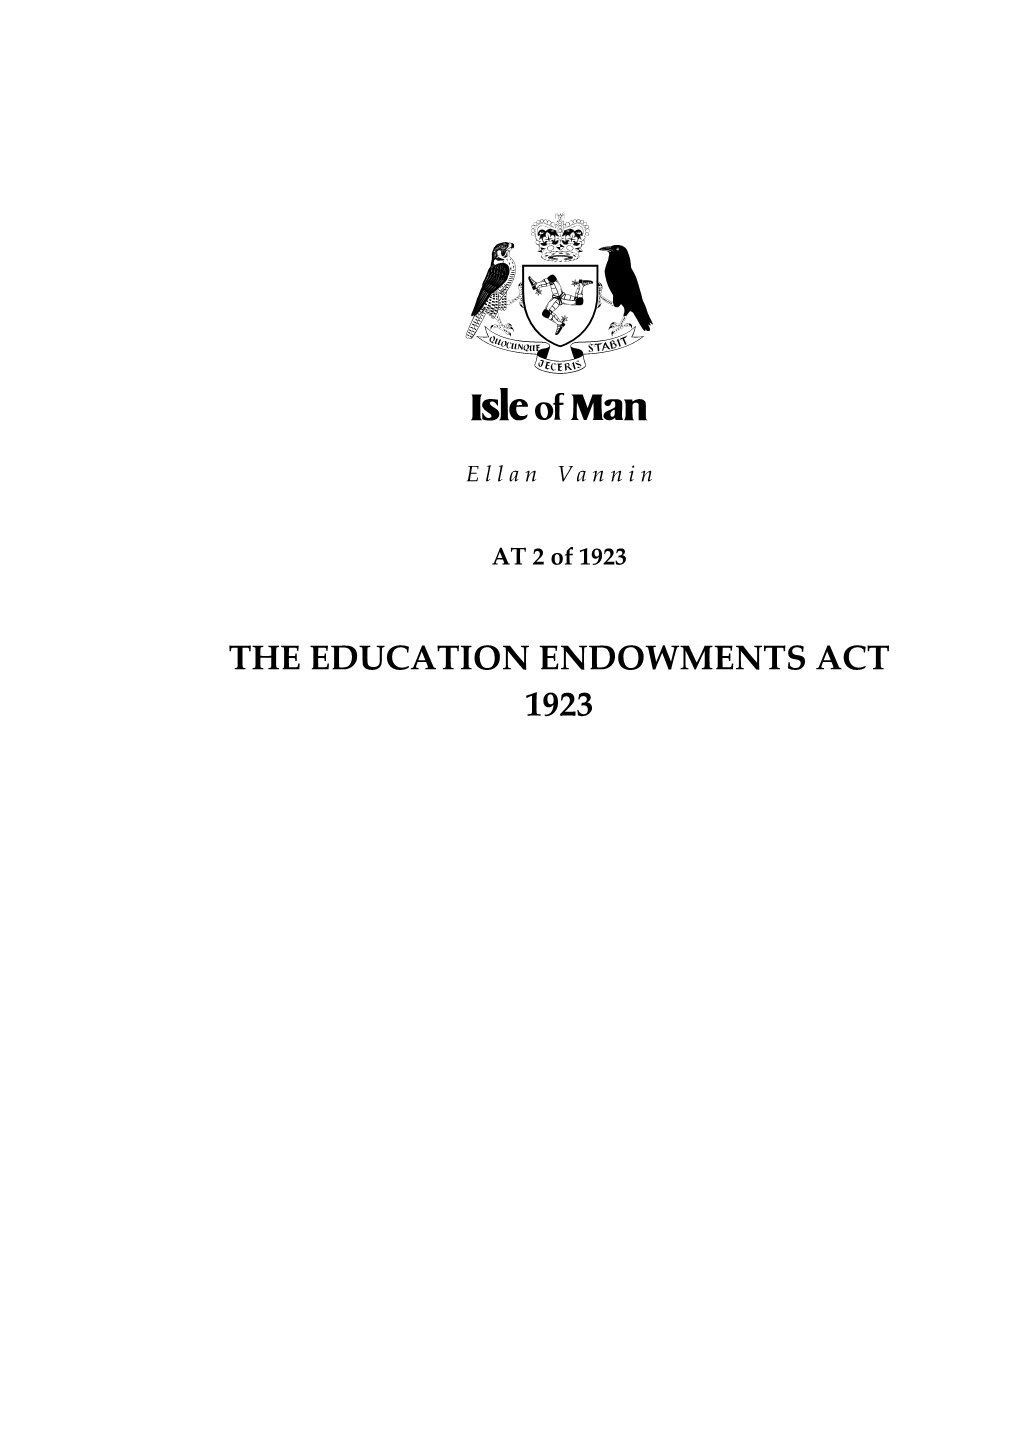 The Education Endowments Act 1923